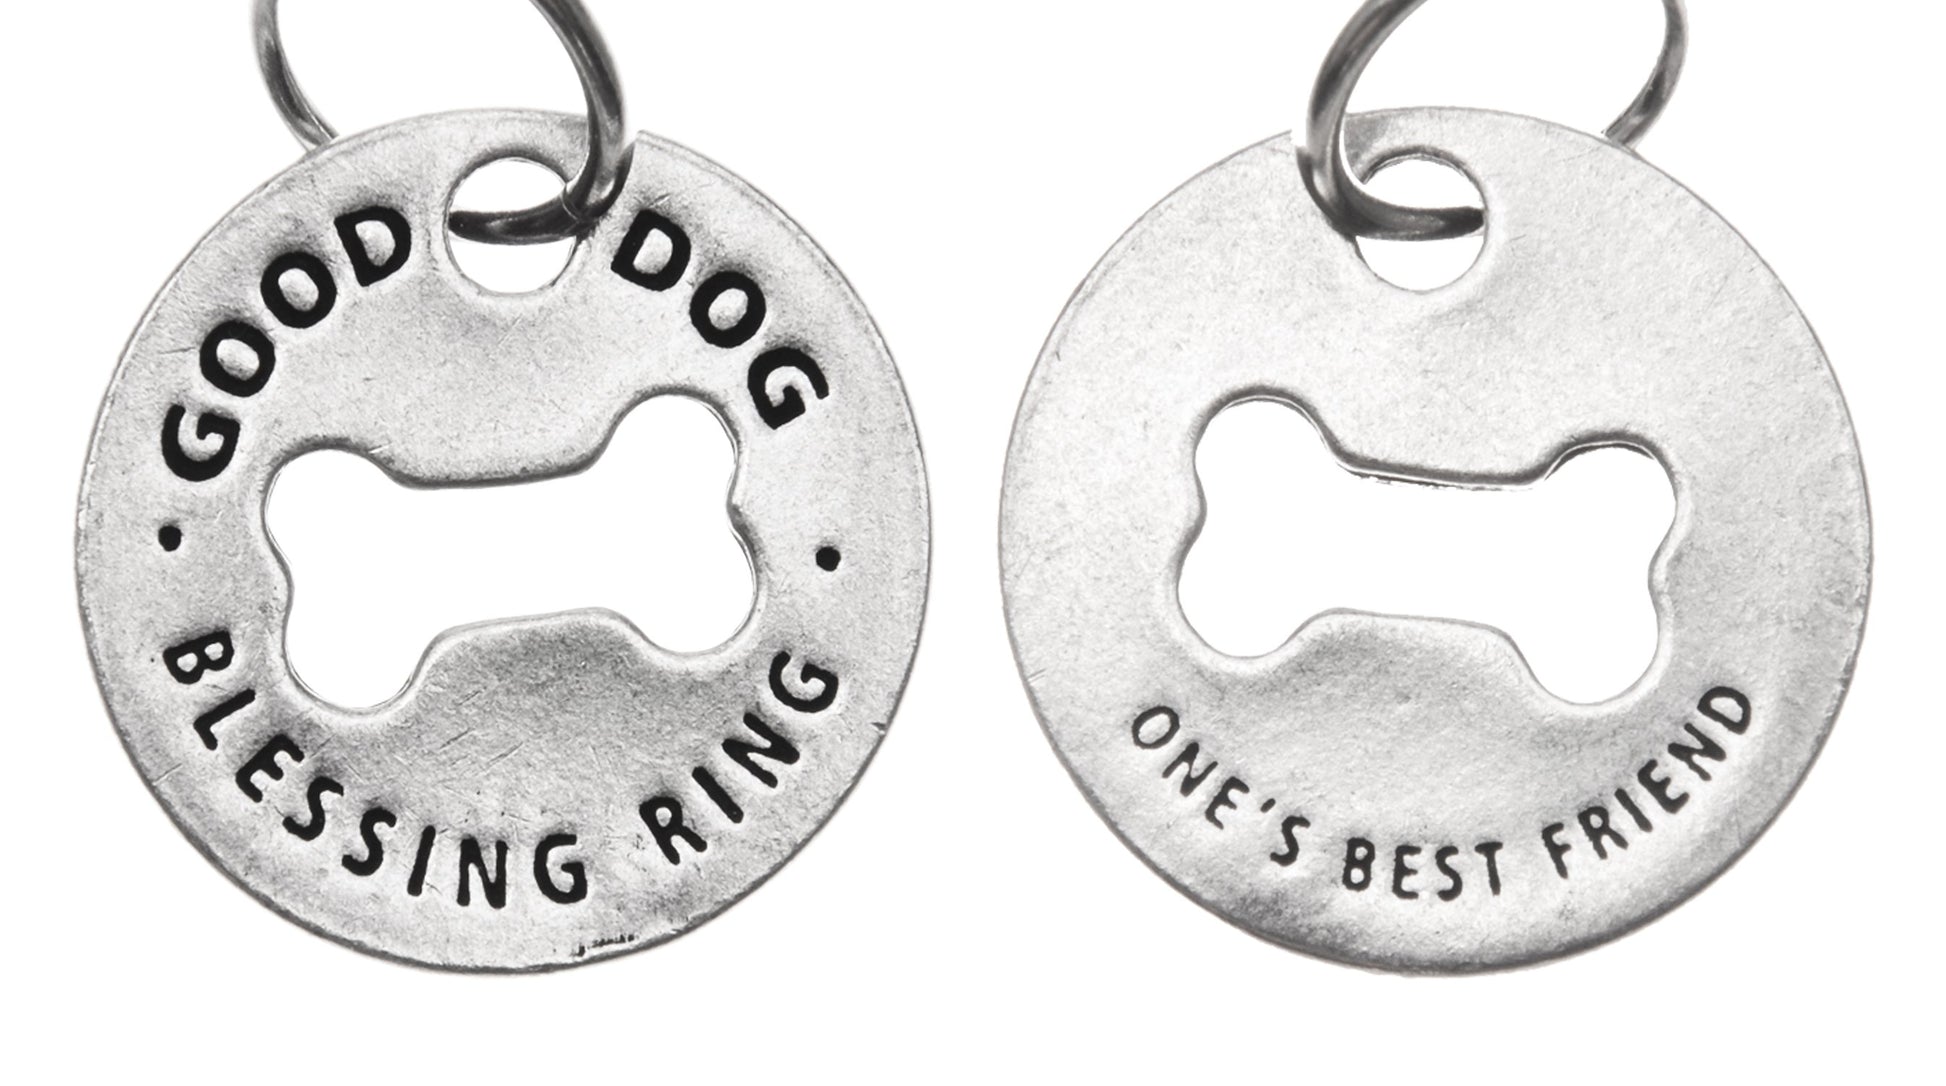 Good Dog Blessing Ring front and back